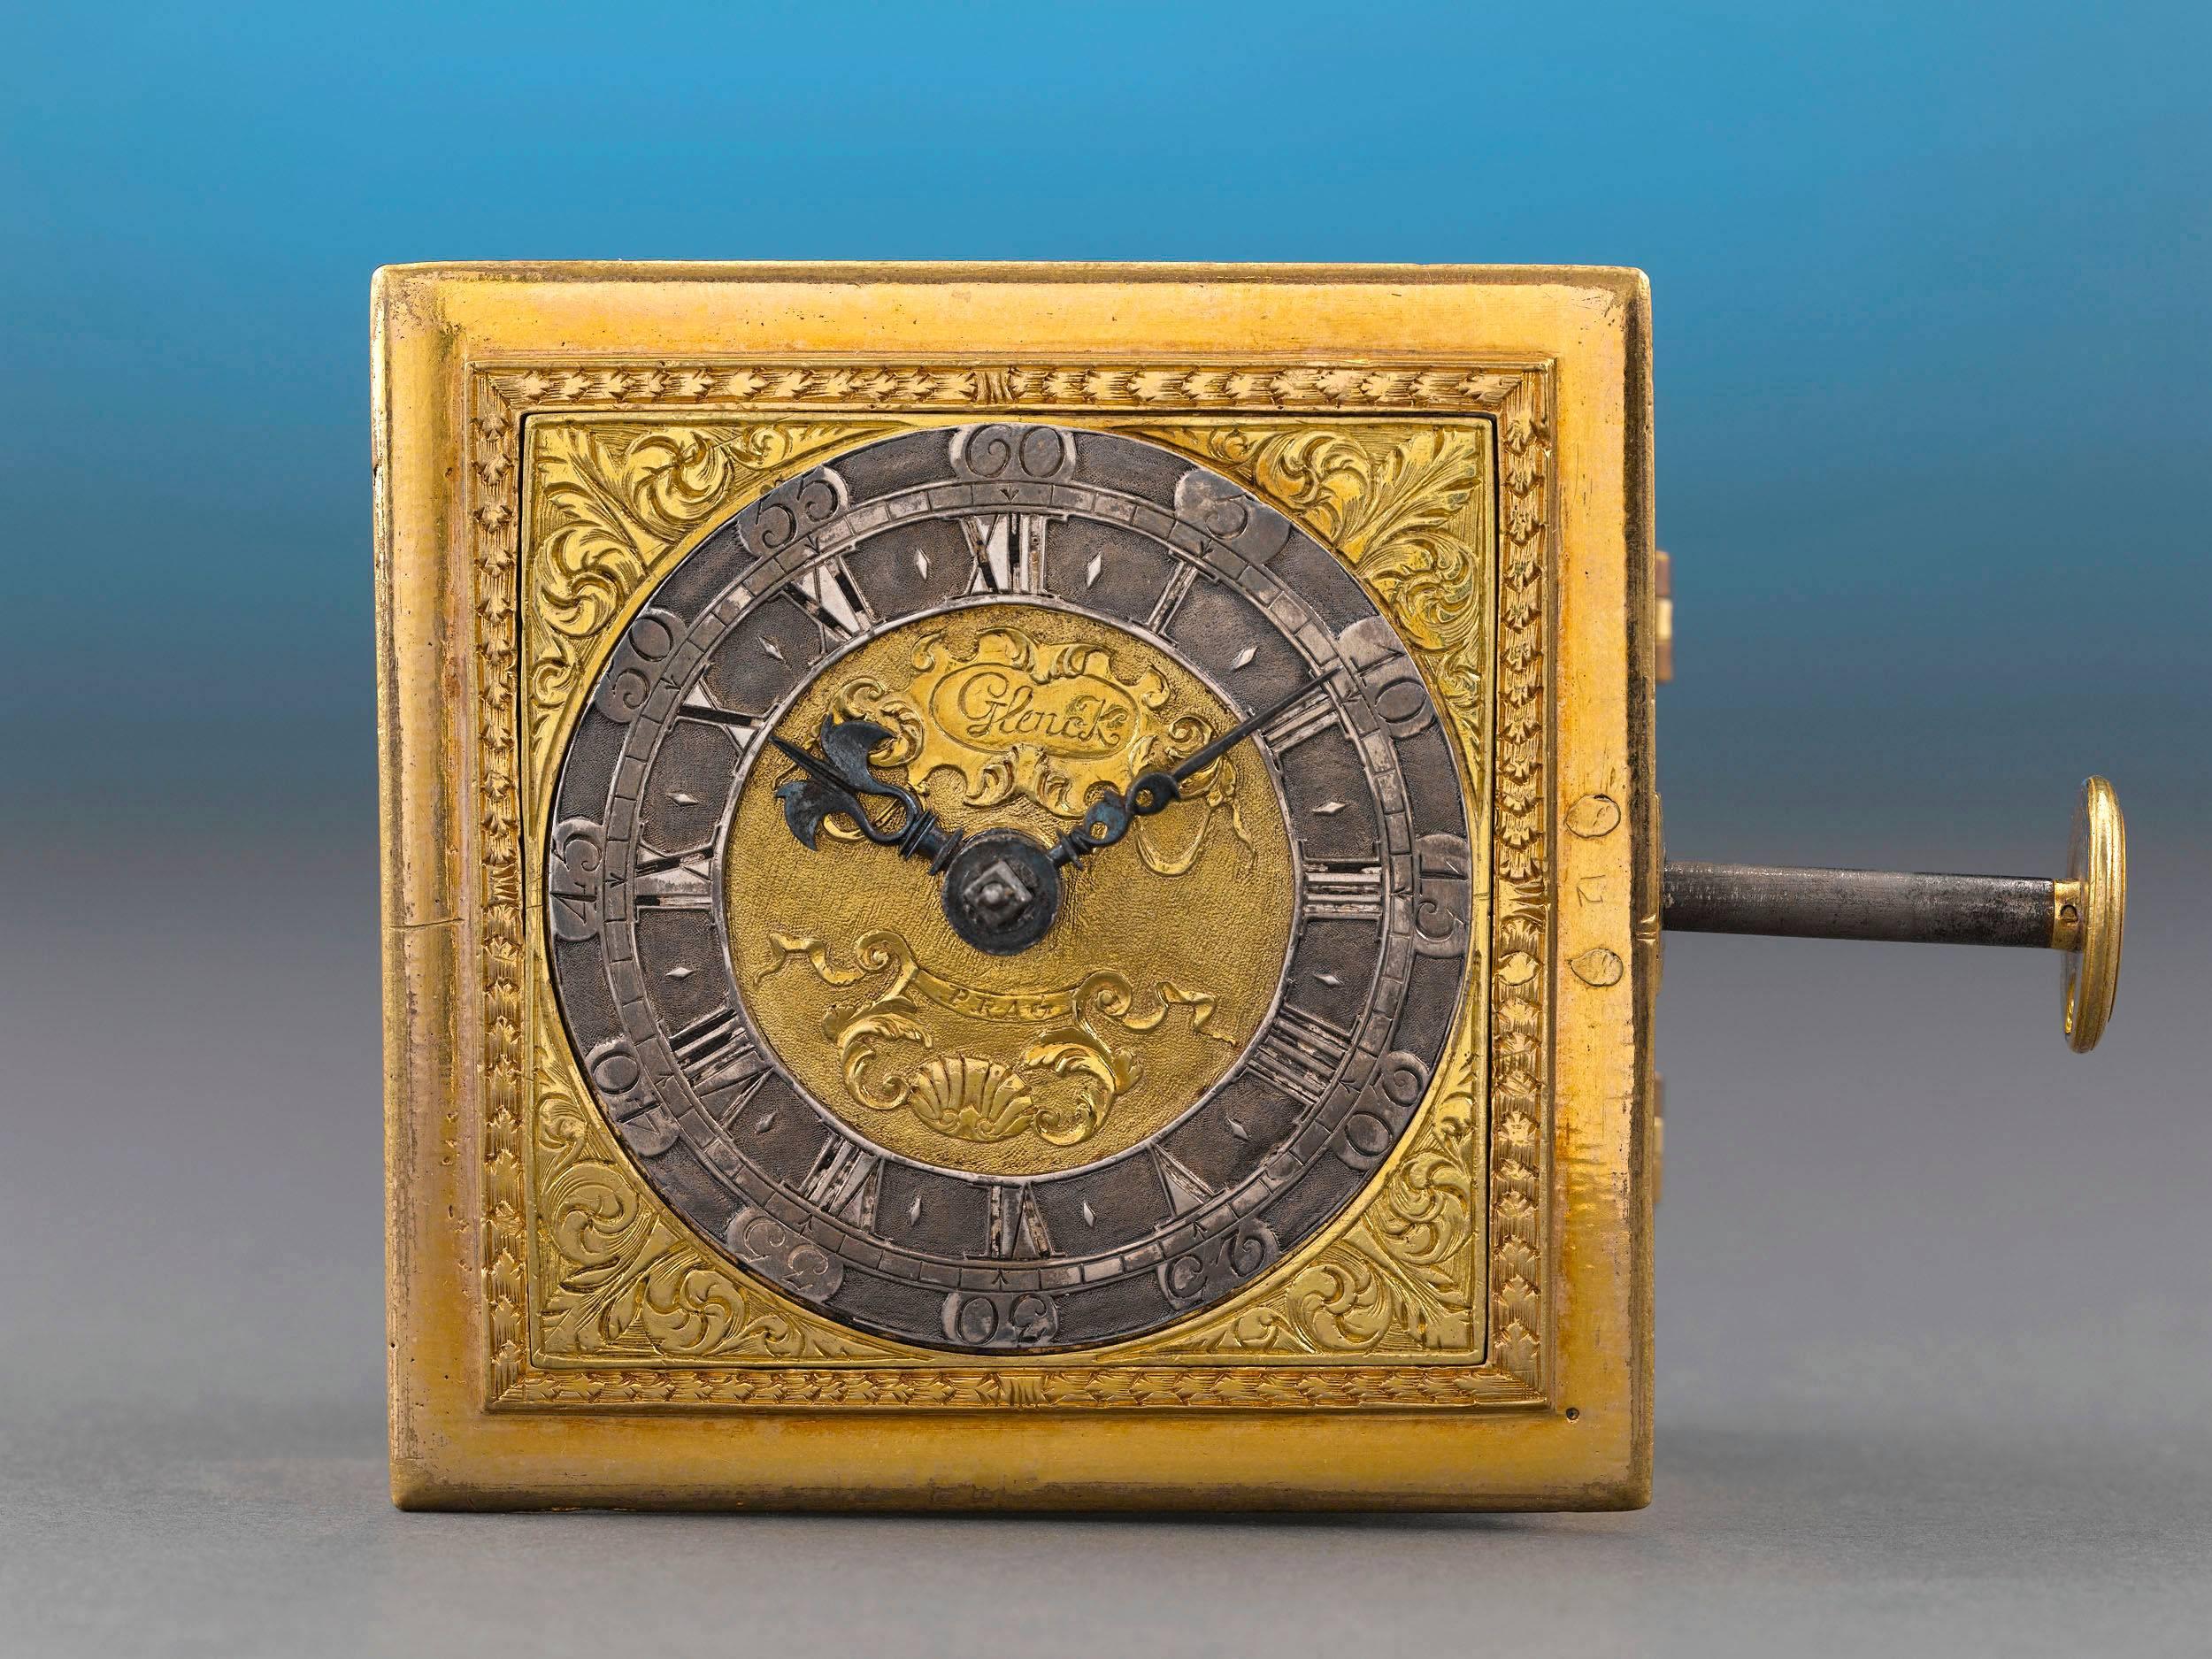 Crafted by Prague clockmaker Andreas Glenck, this rare and important horizontal table clock dates to the late Renaissance and has the ability to strike on the hour and quarter hour. This variety of square-form clock is one of the first spring-driven